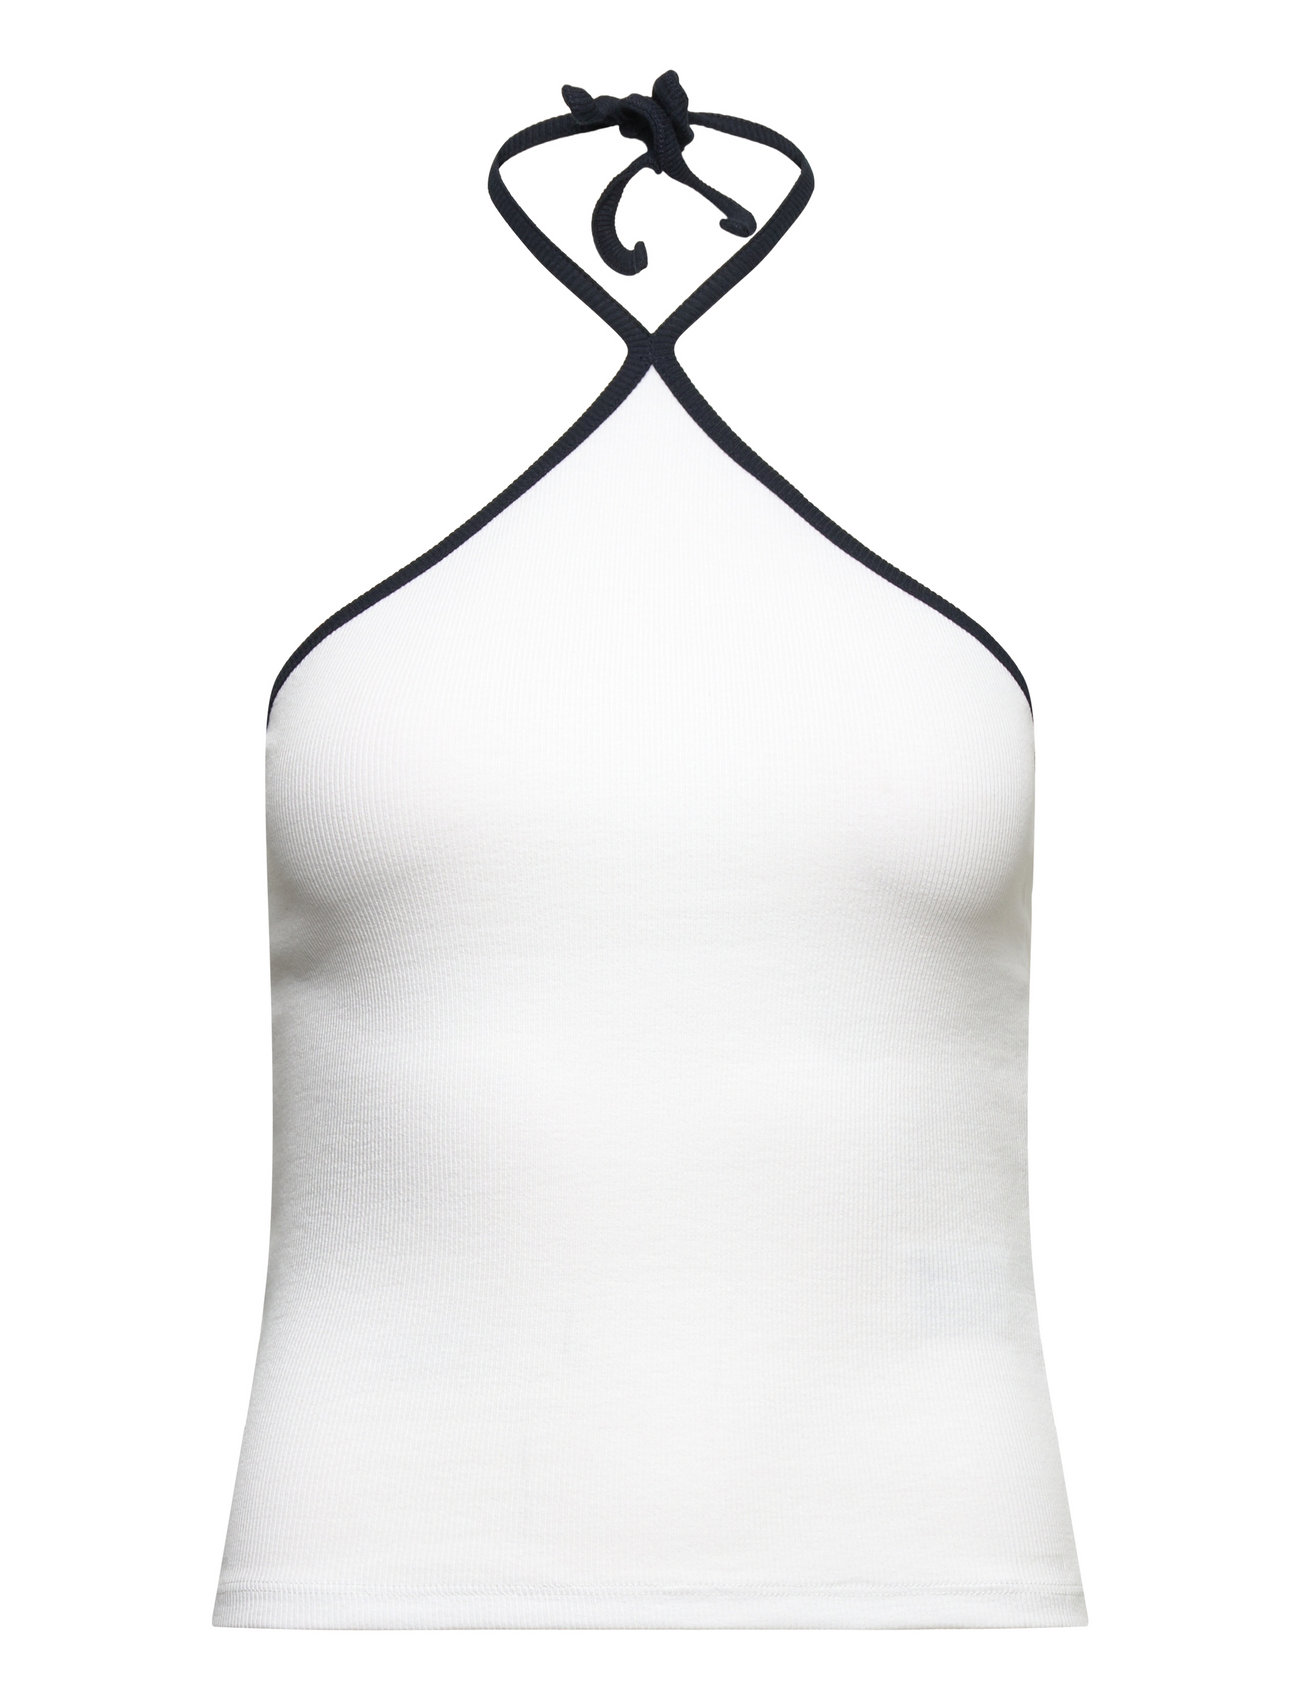 Enally Sl Contrast Top 5314 Tops T-shirts & Tops Sleeveless White Envii